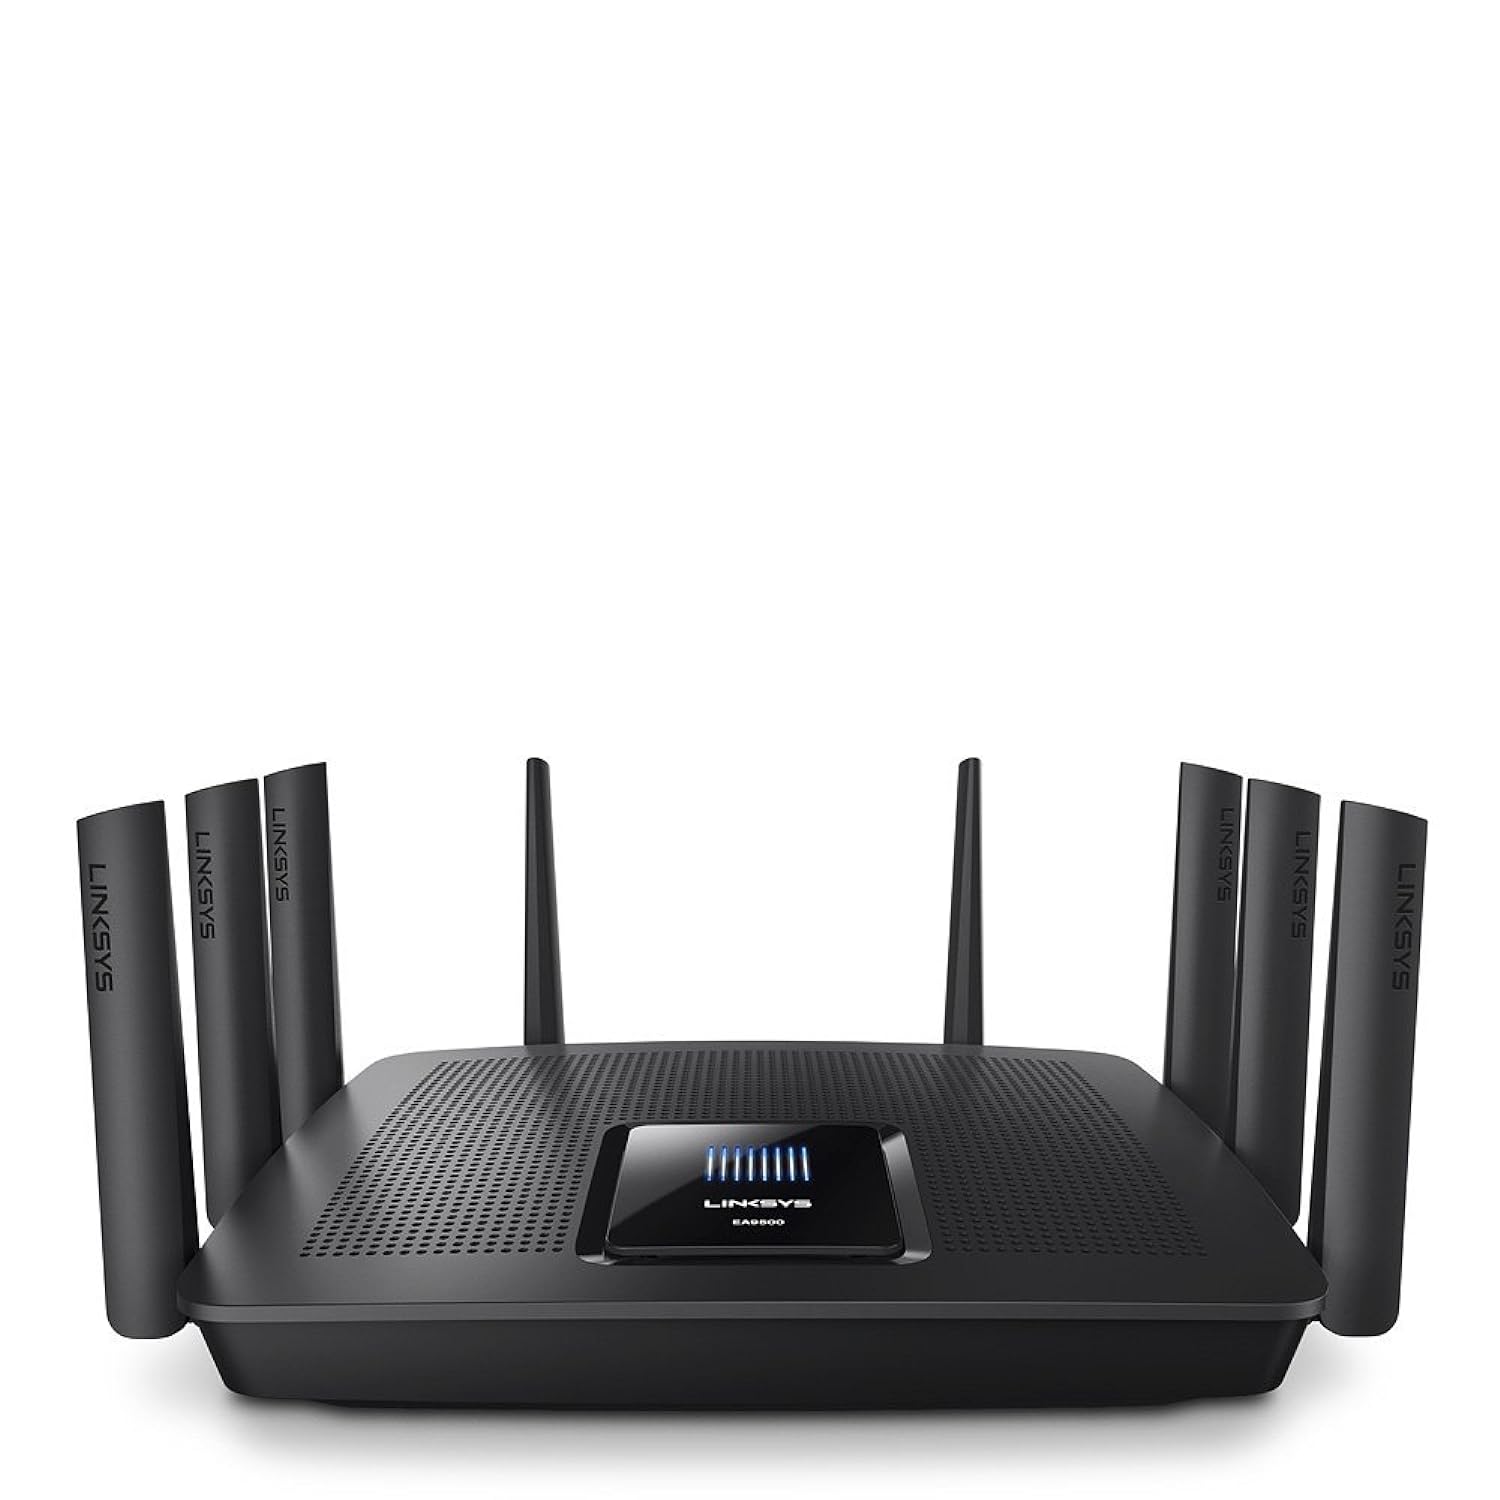 Linksys WiFi 5 Router, Tri-Band, 3,000 Sq. ft Coverage, 25+ Devices, Speeds up to (AC5400) 5.4Gbps - EA9500